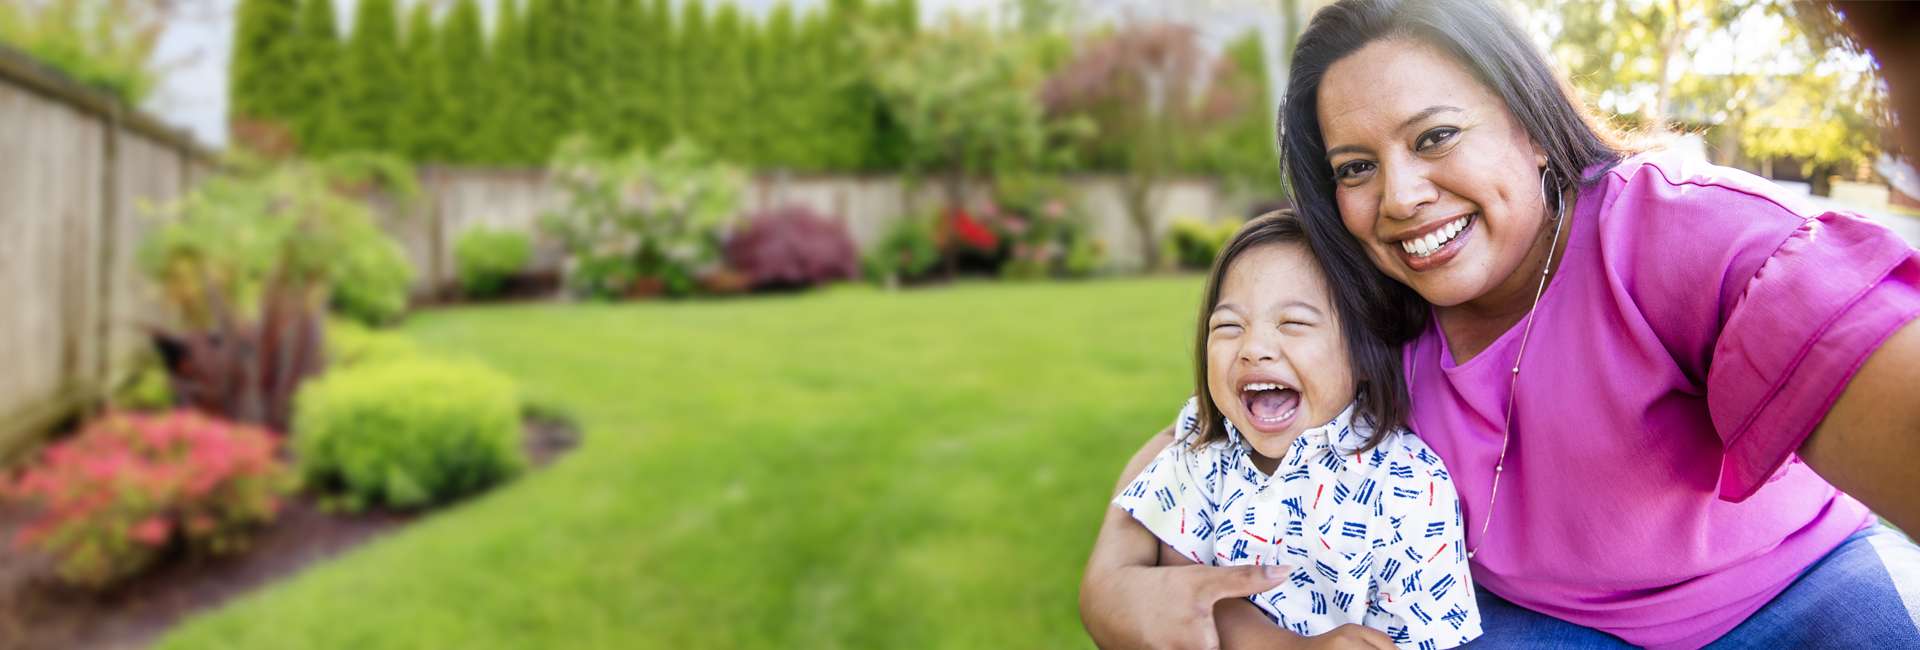 woman in a pink shirt smiling holding her laughing child in their back yard.